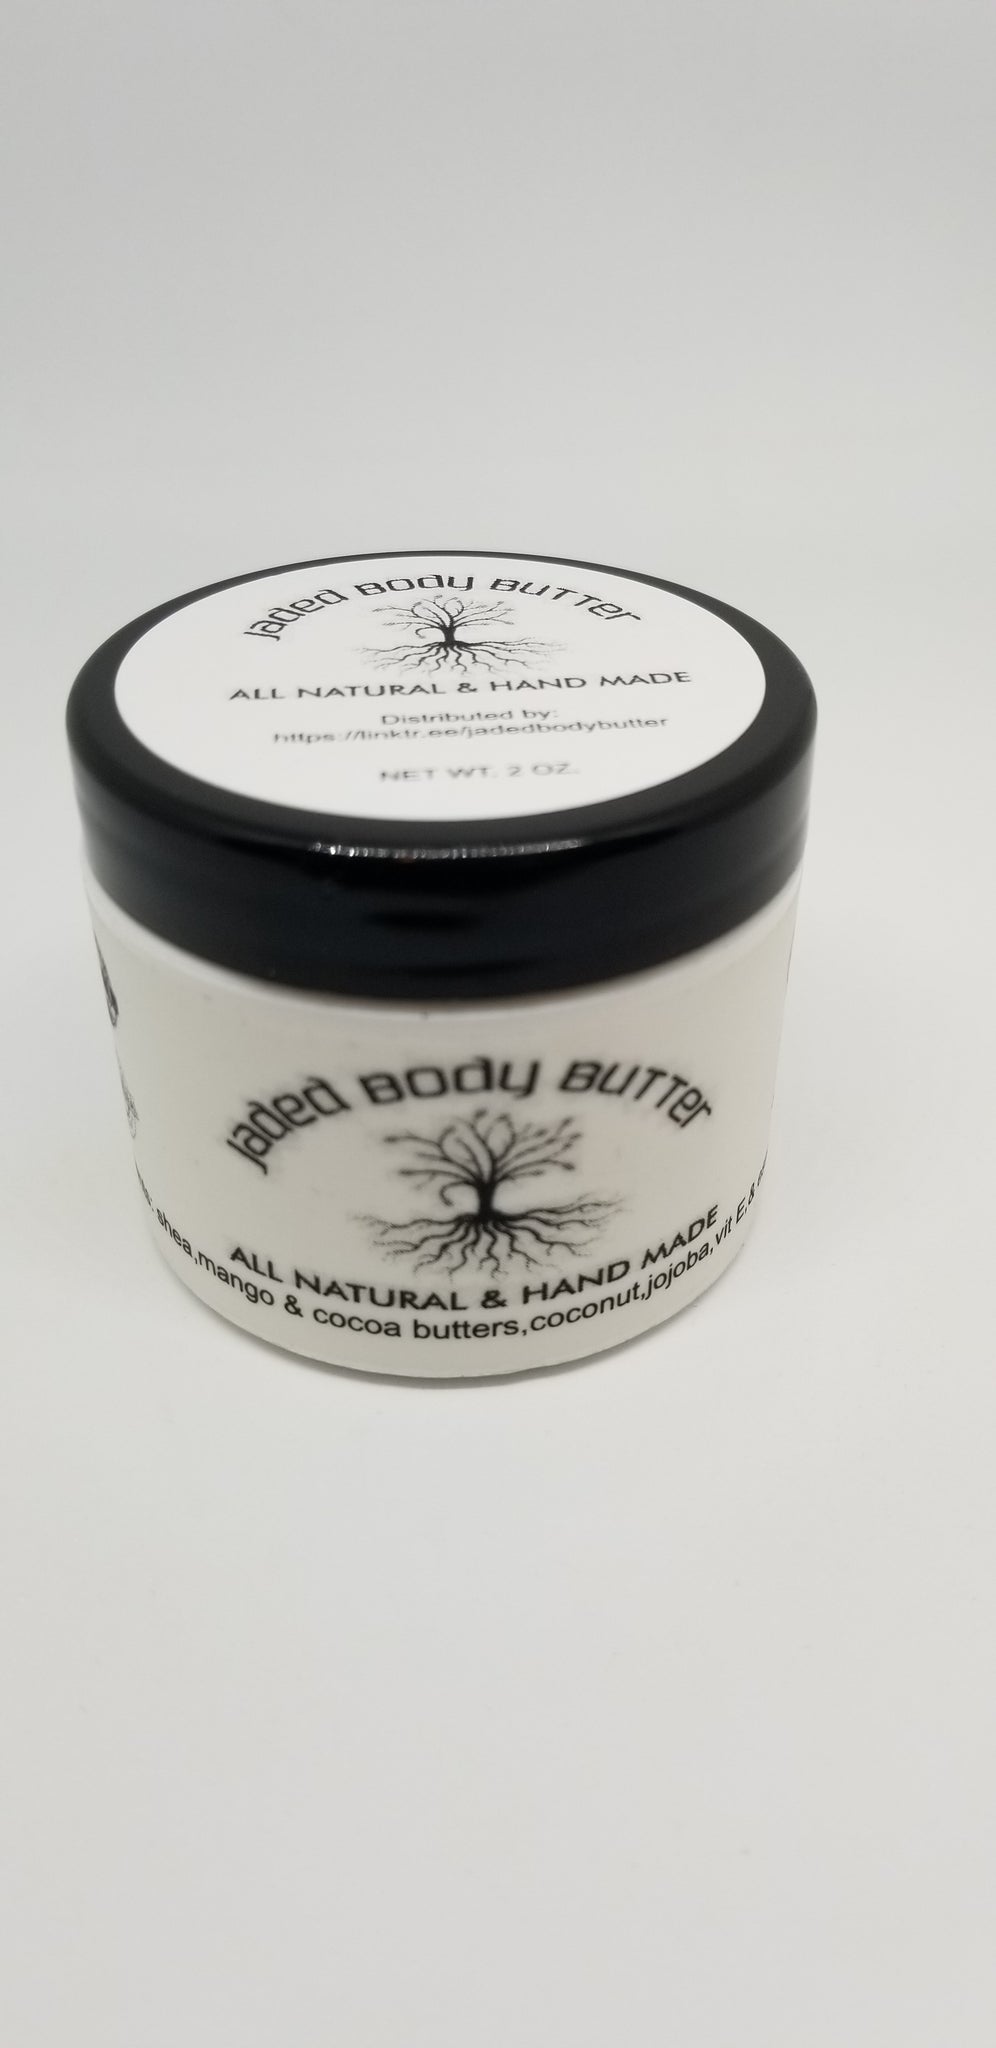 Whipped Body Butter in Dryden, NY